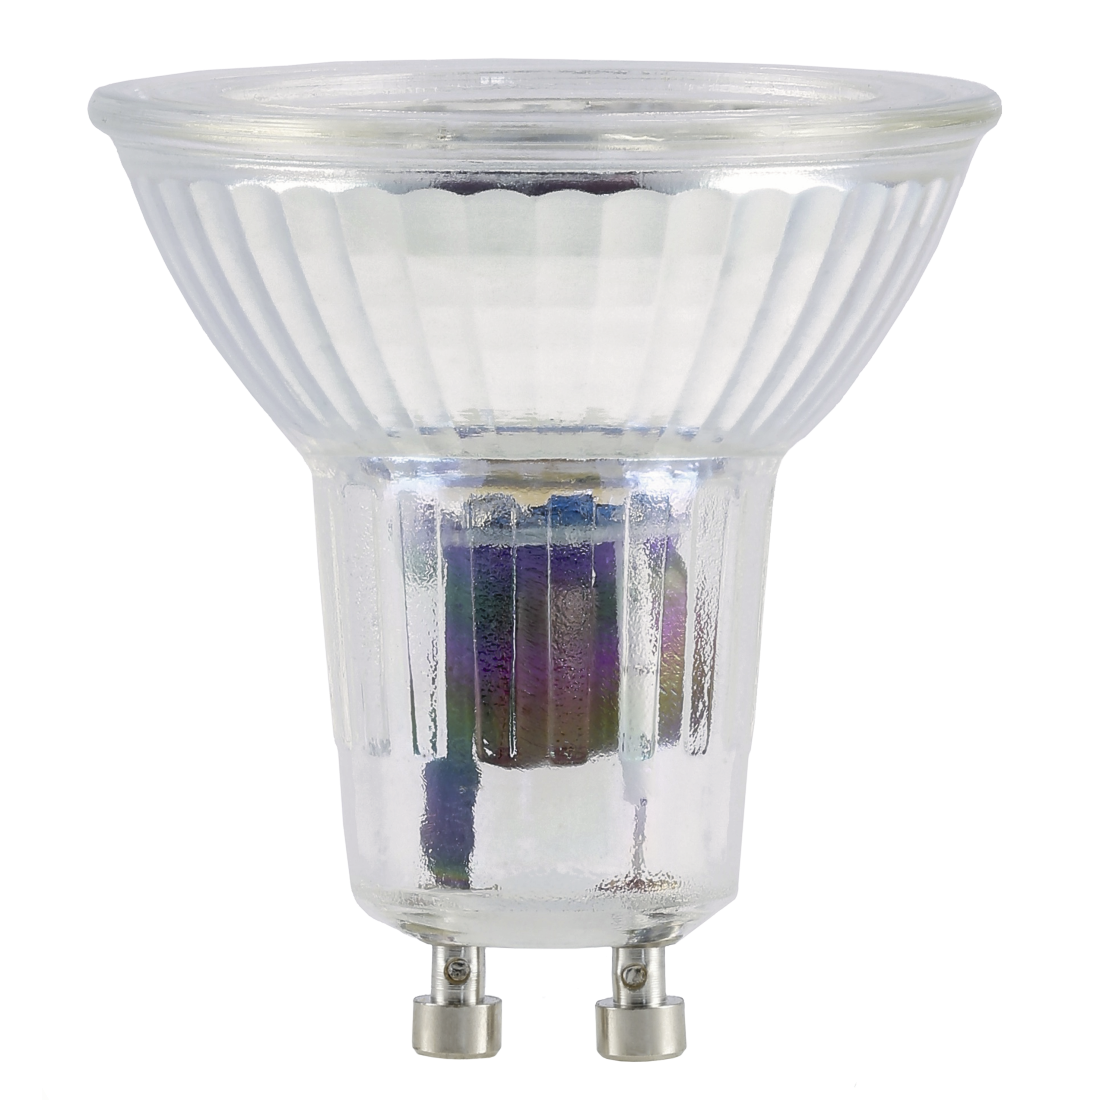 abx High-Res Image - Xavax, LED Bulb, GU10, 350 lm Replaces 50 W, Reflector Lamp PAR16, daylight, Glass